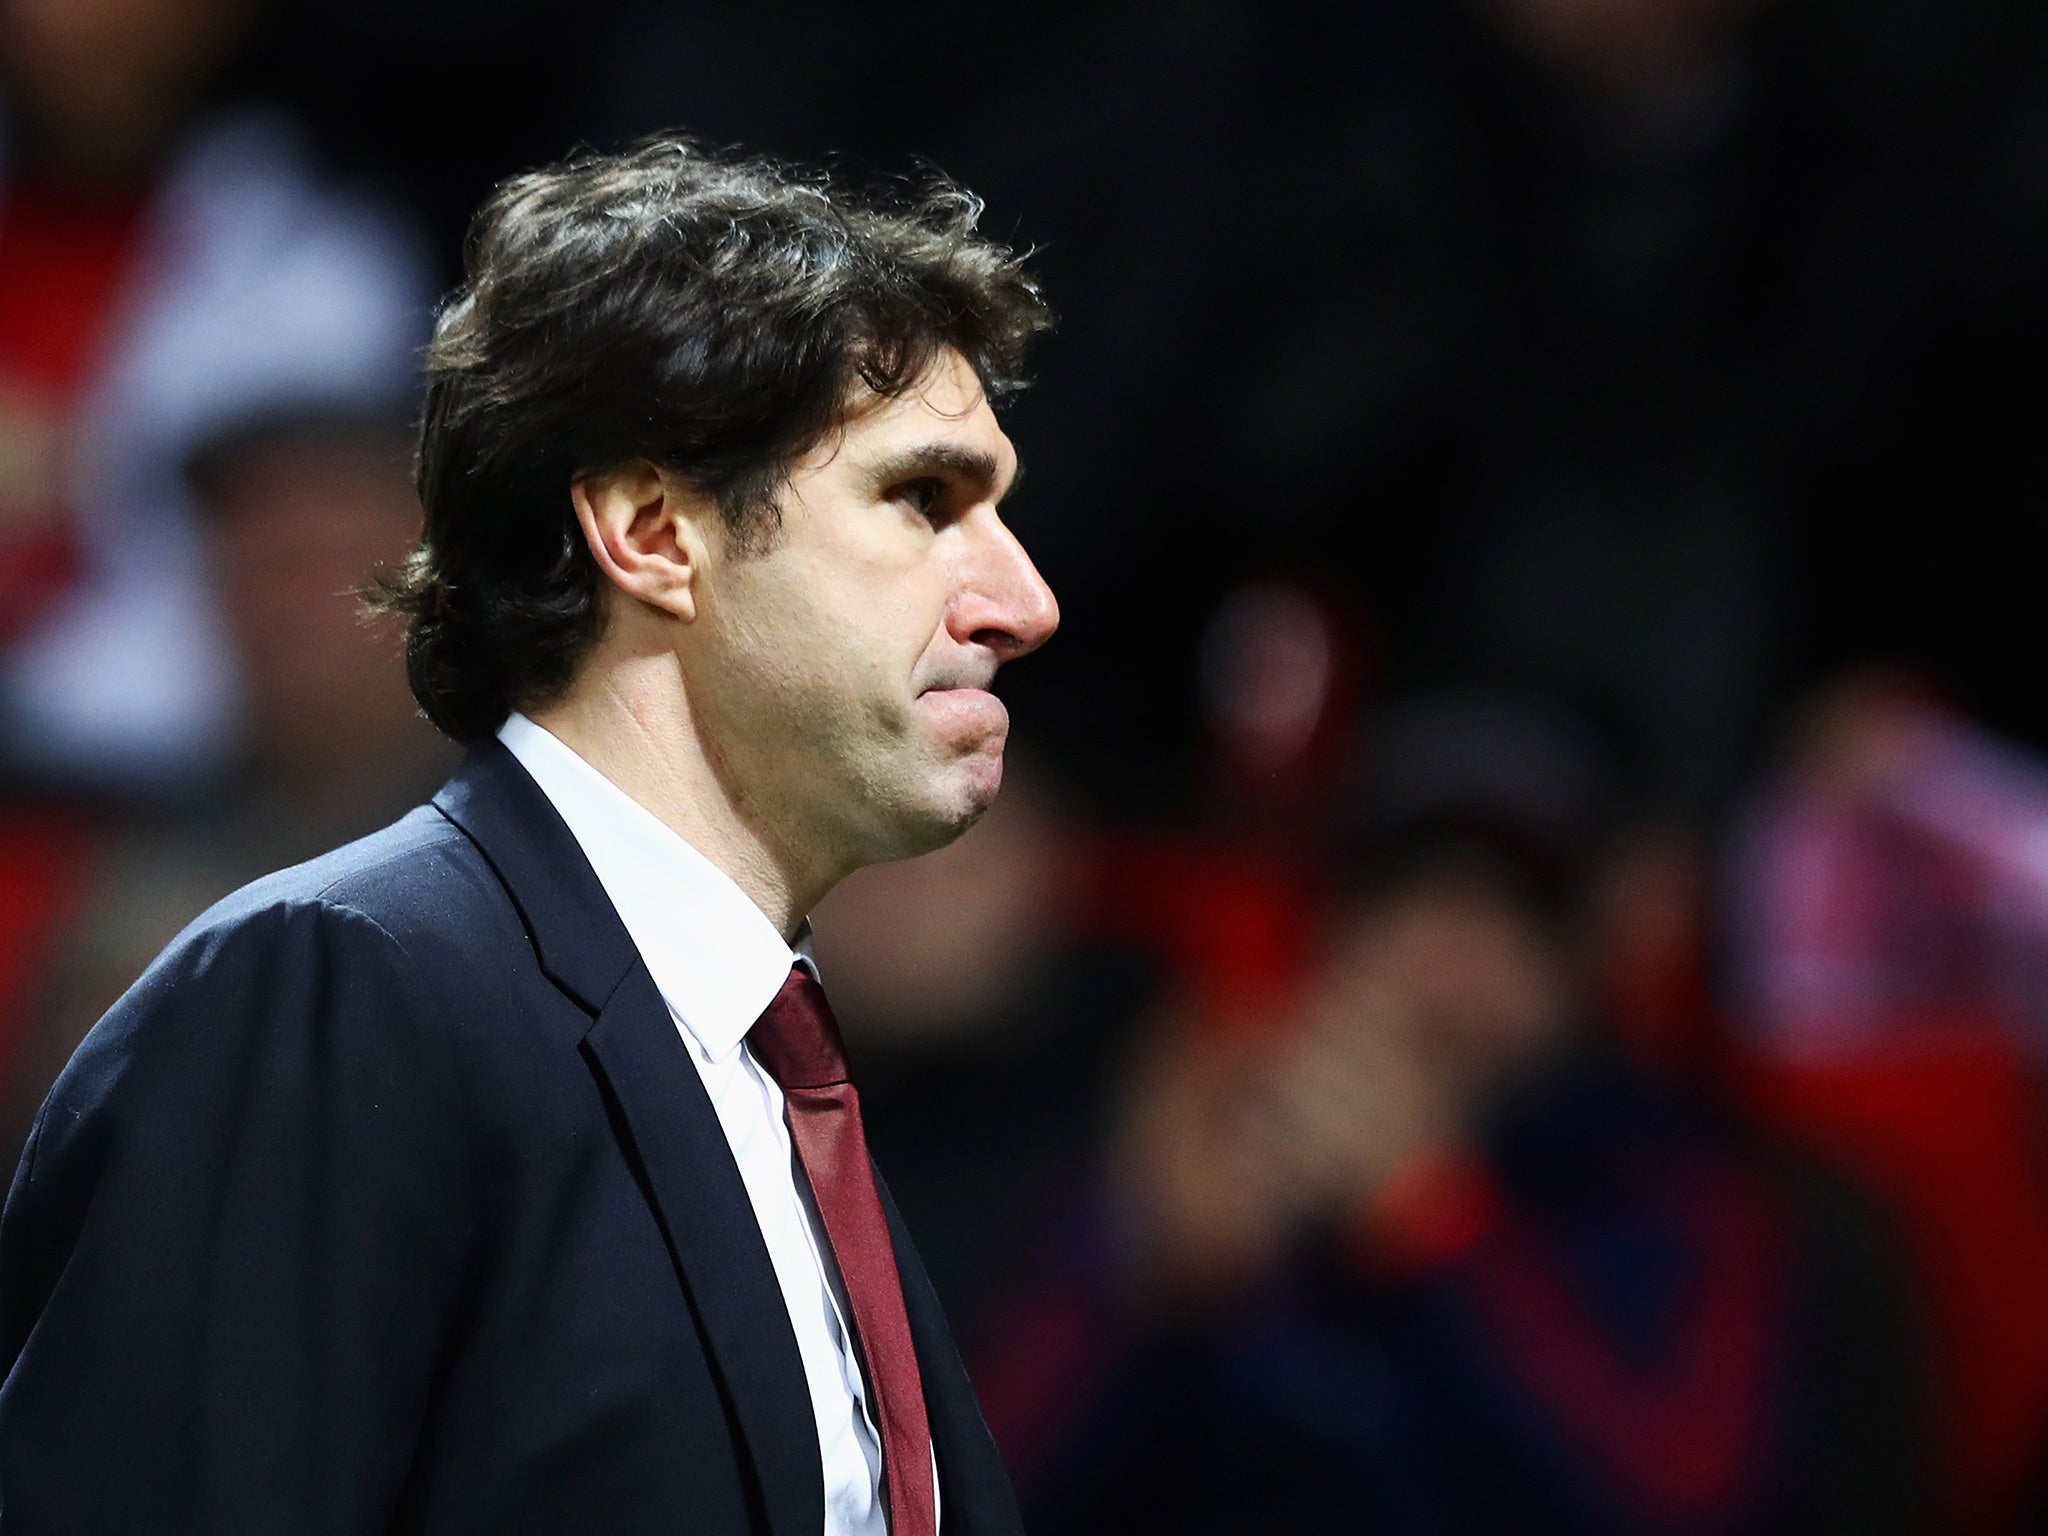 Karanka has been out of work since being sacked by Middlesbrough last year